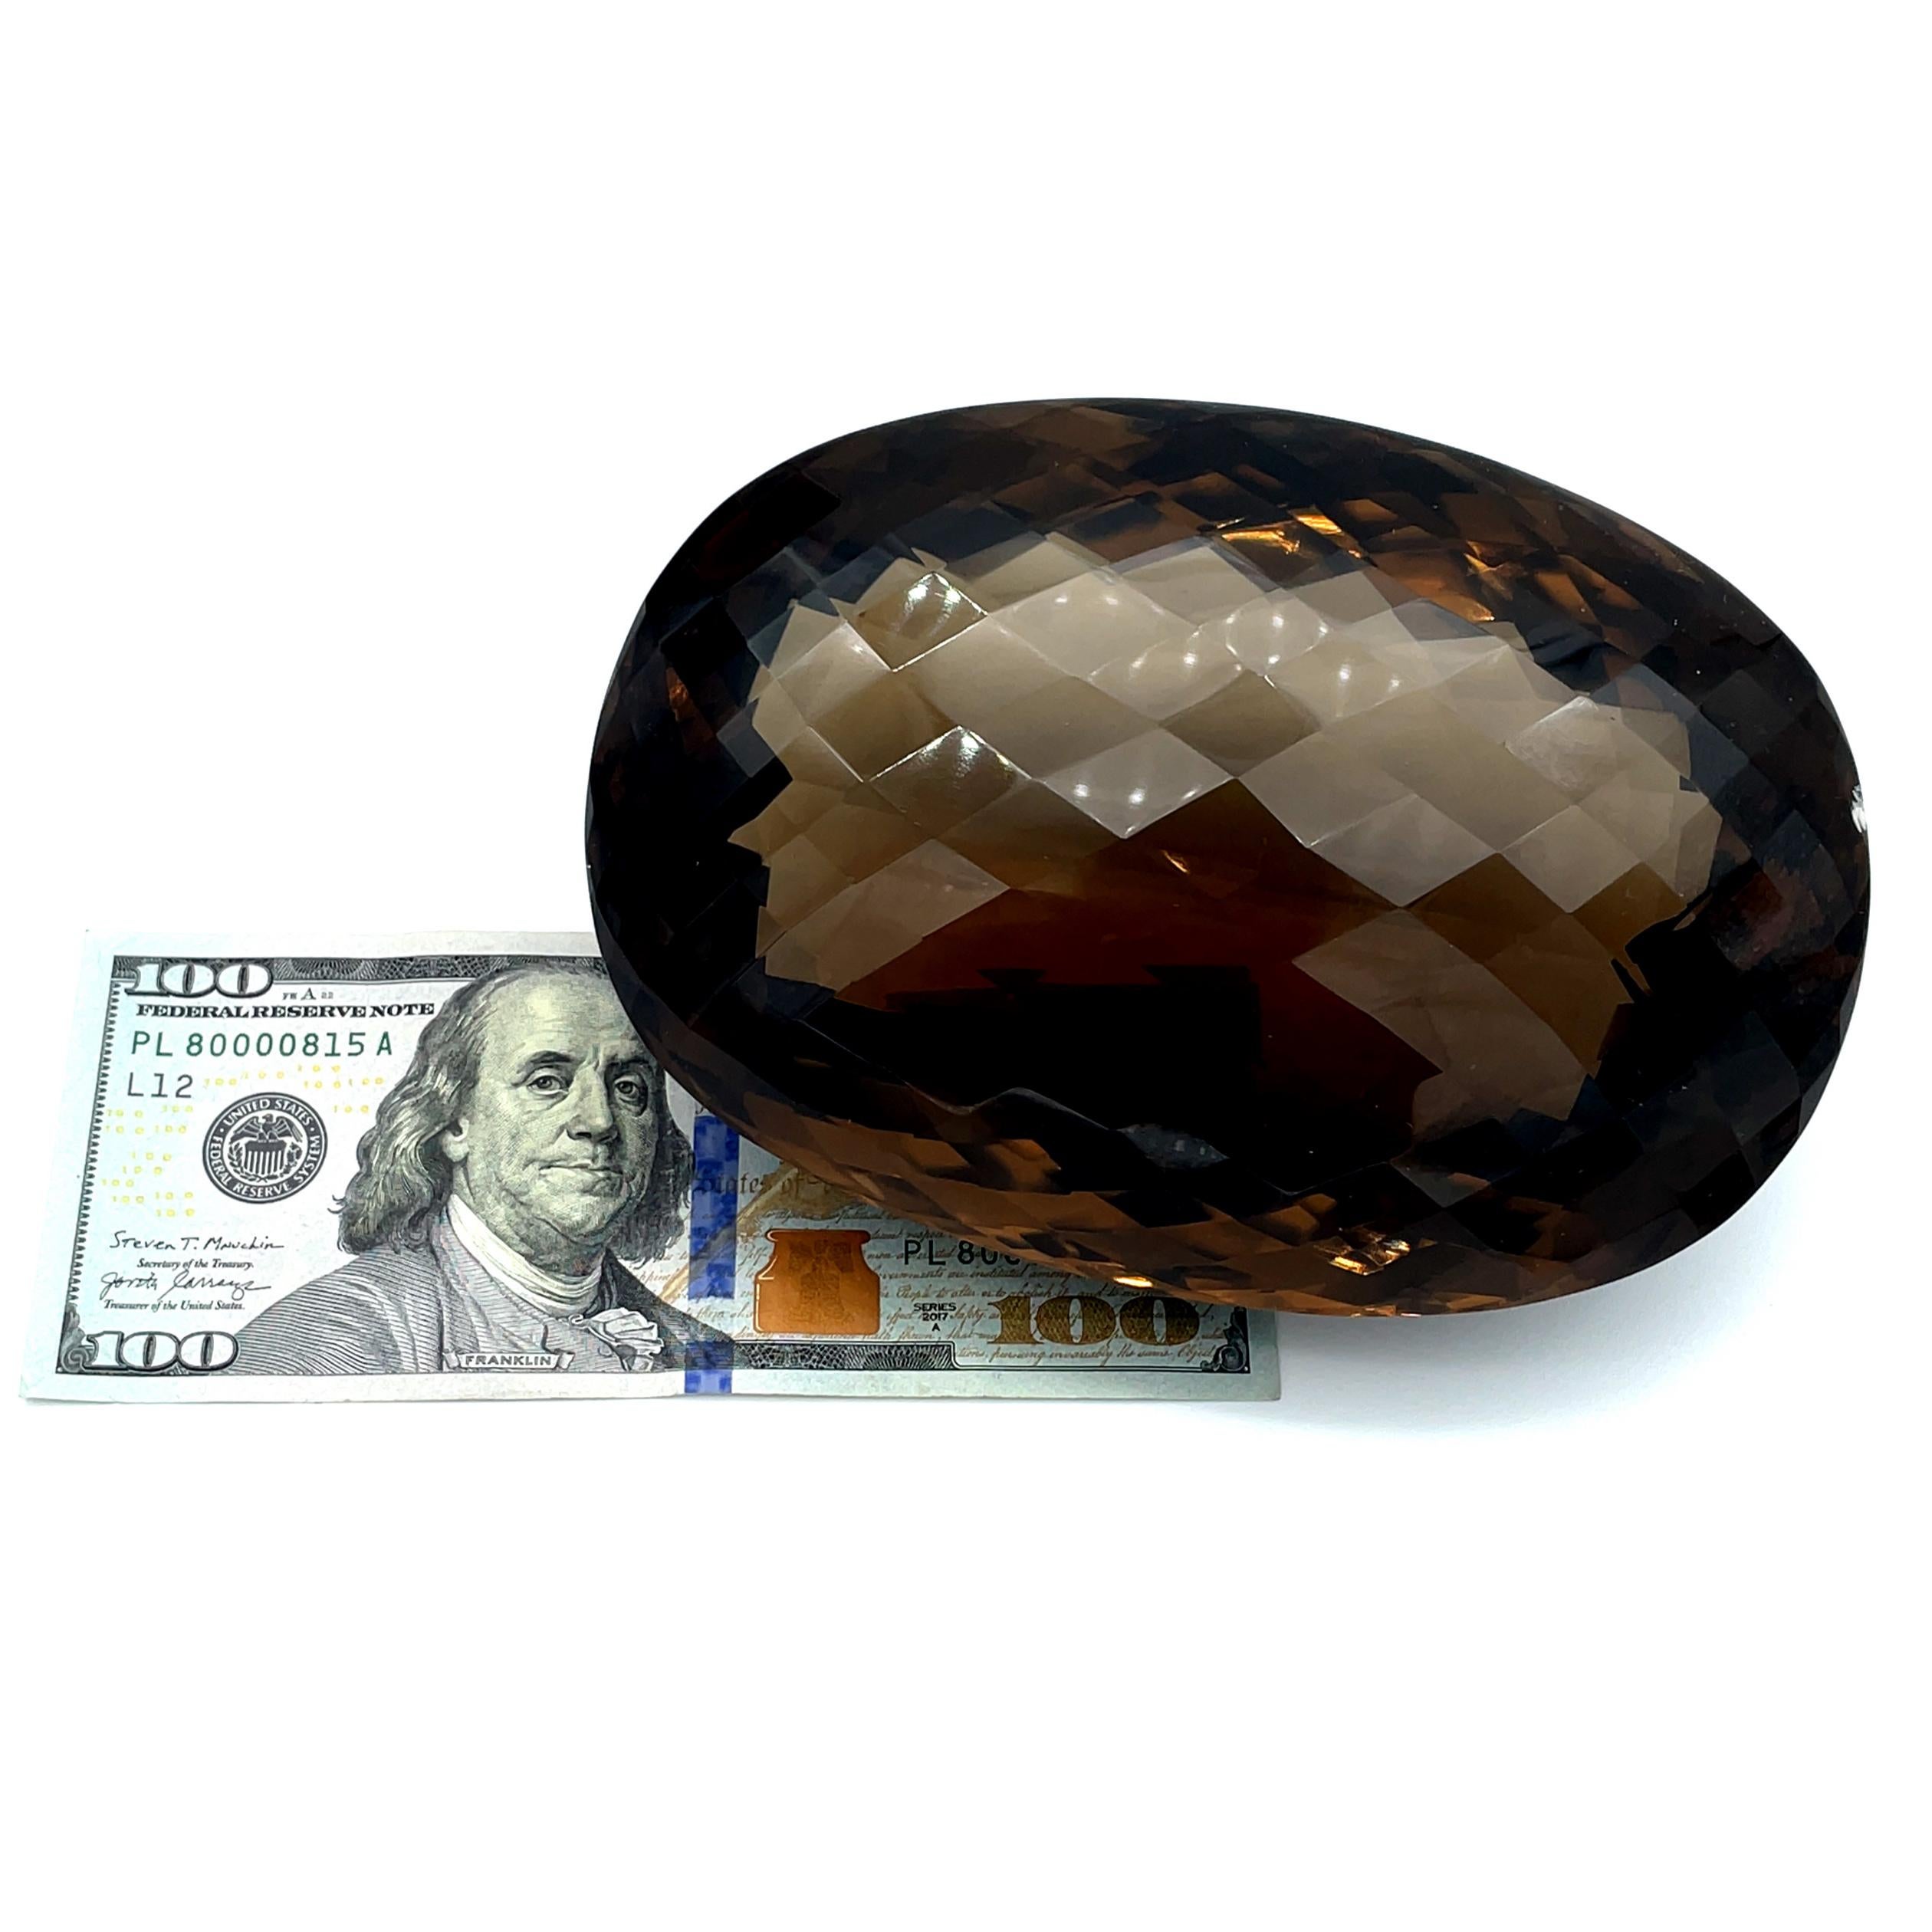 Rarely is a jewel large enough to be weighed in pounds, yet this exquisite specimen weighs 3.276 pounds! A real conversation starter and preeminent example of the earth's ability to create miracles! This oval faceted smoky quartz is absolutely